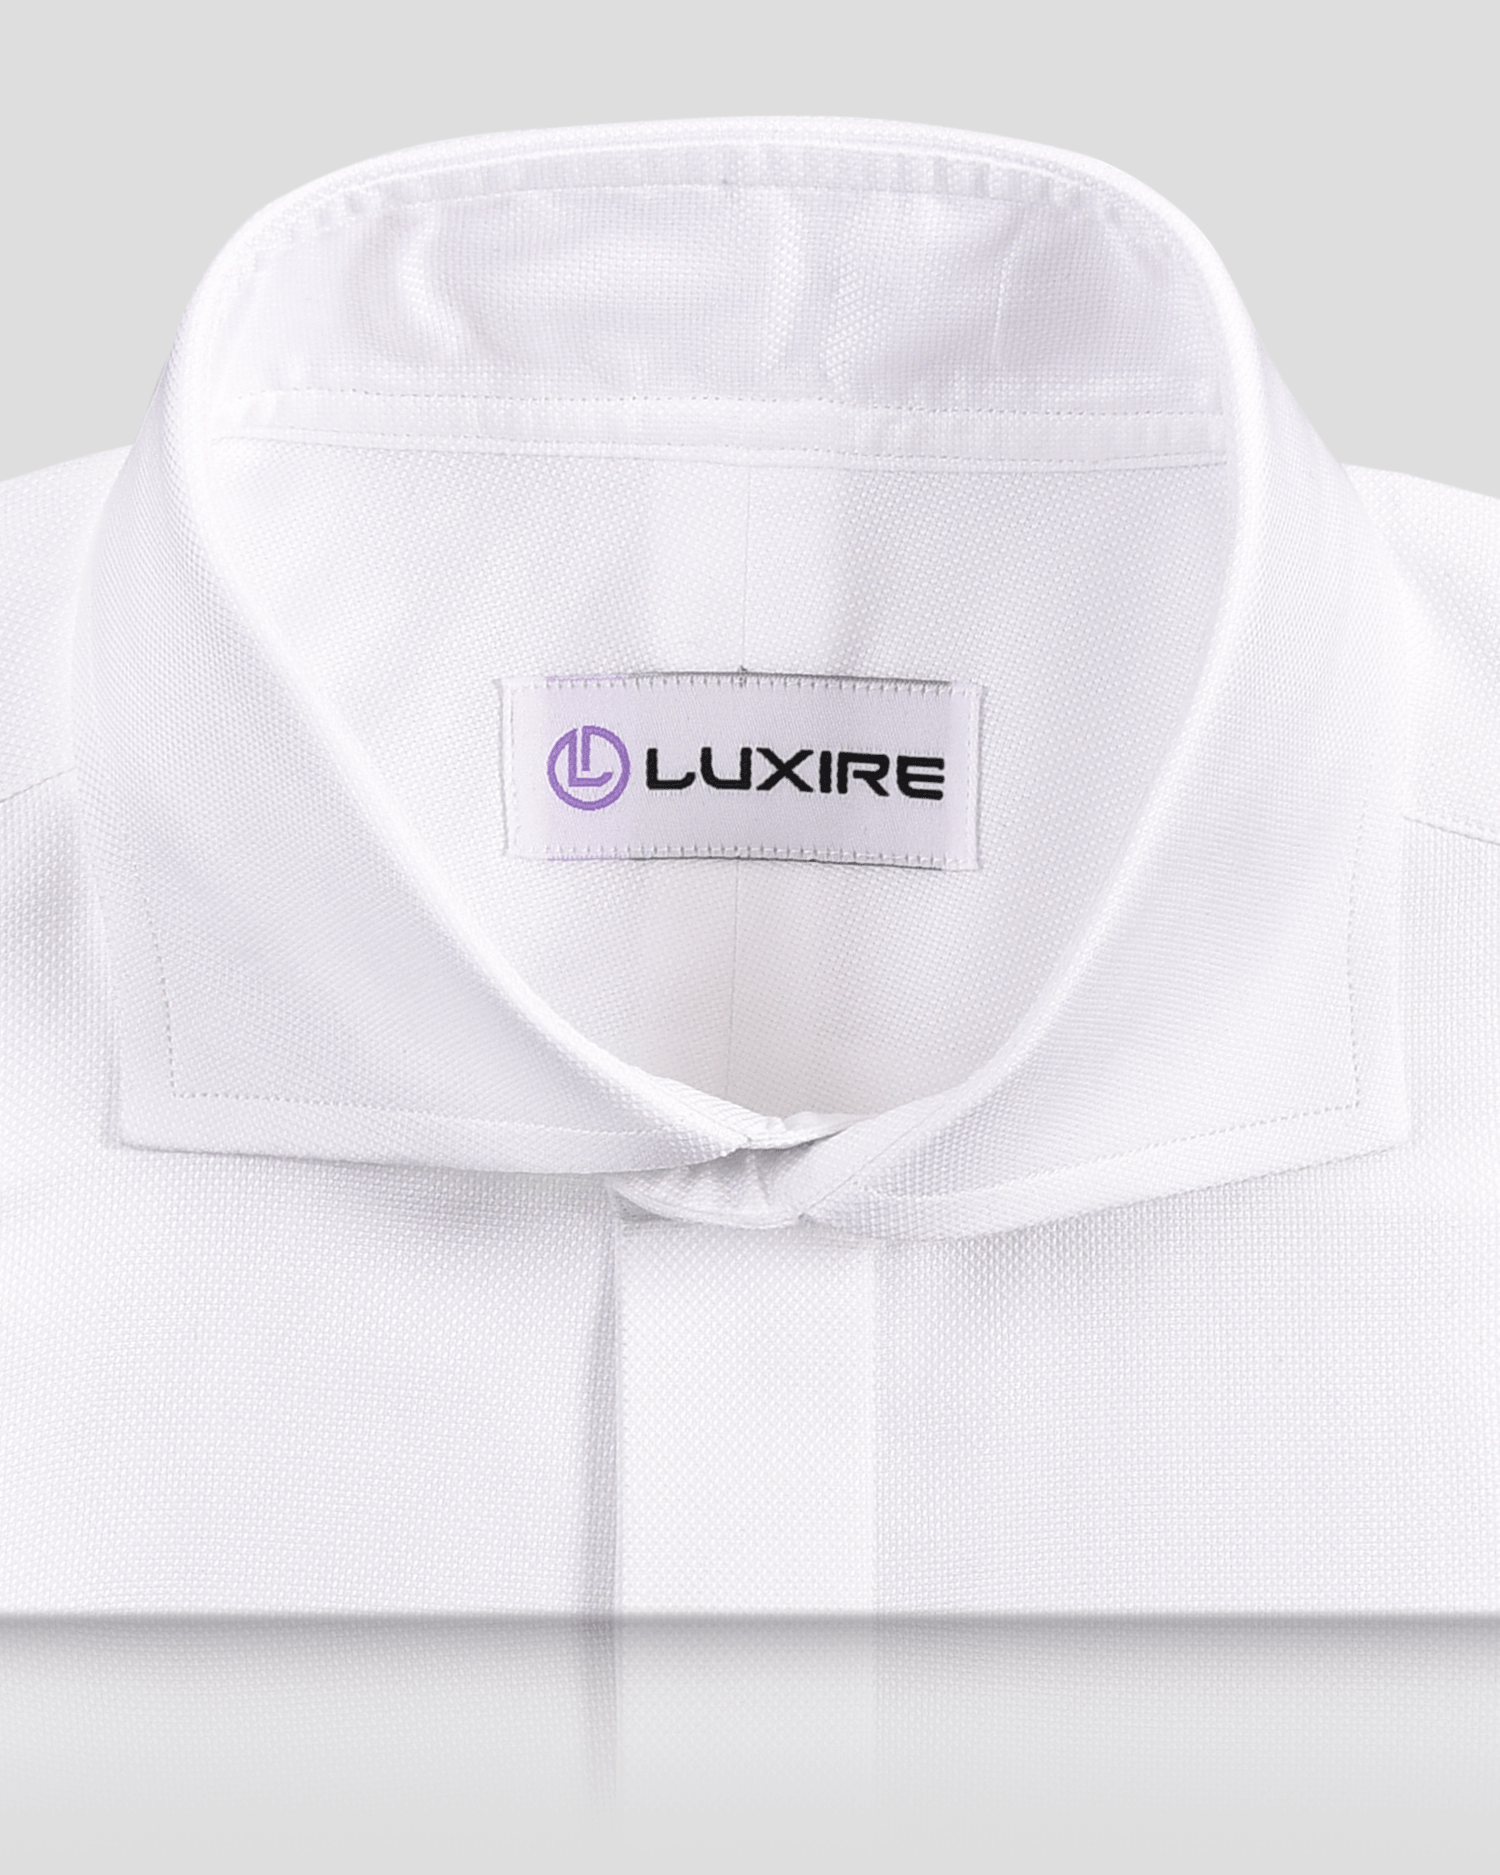 Collar of the custom oxford shirt for men by Luxire in white royal